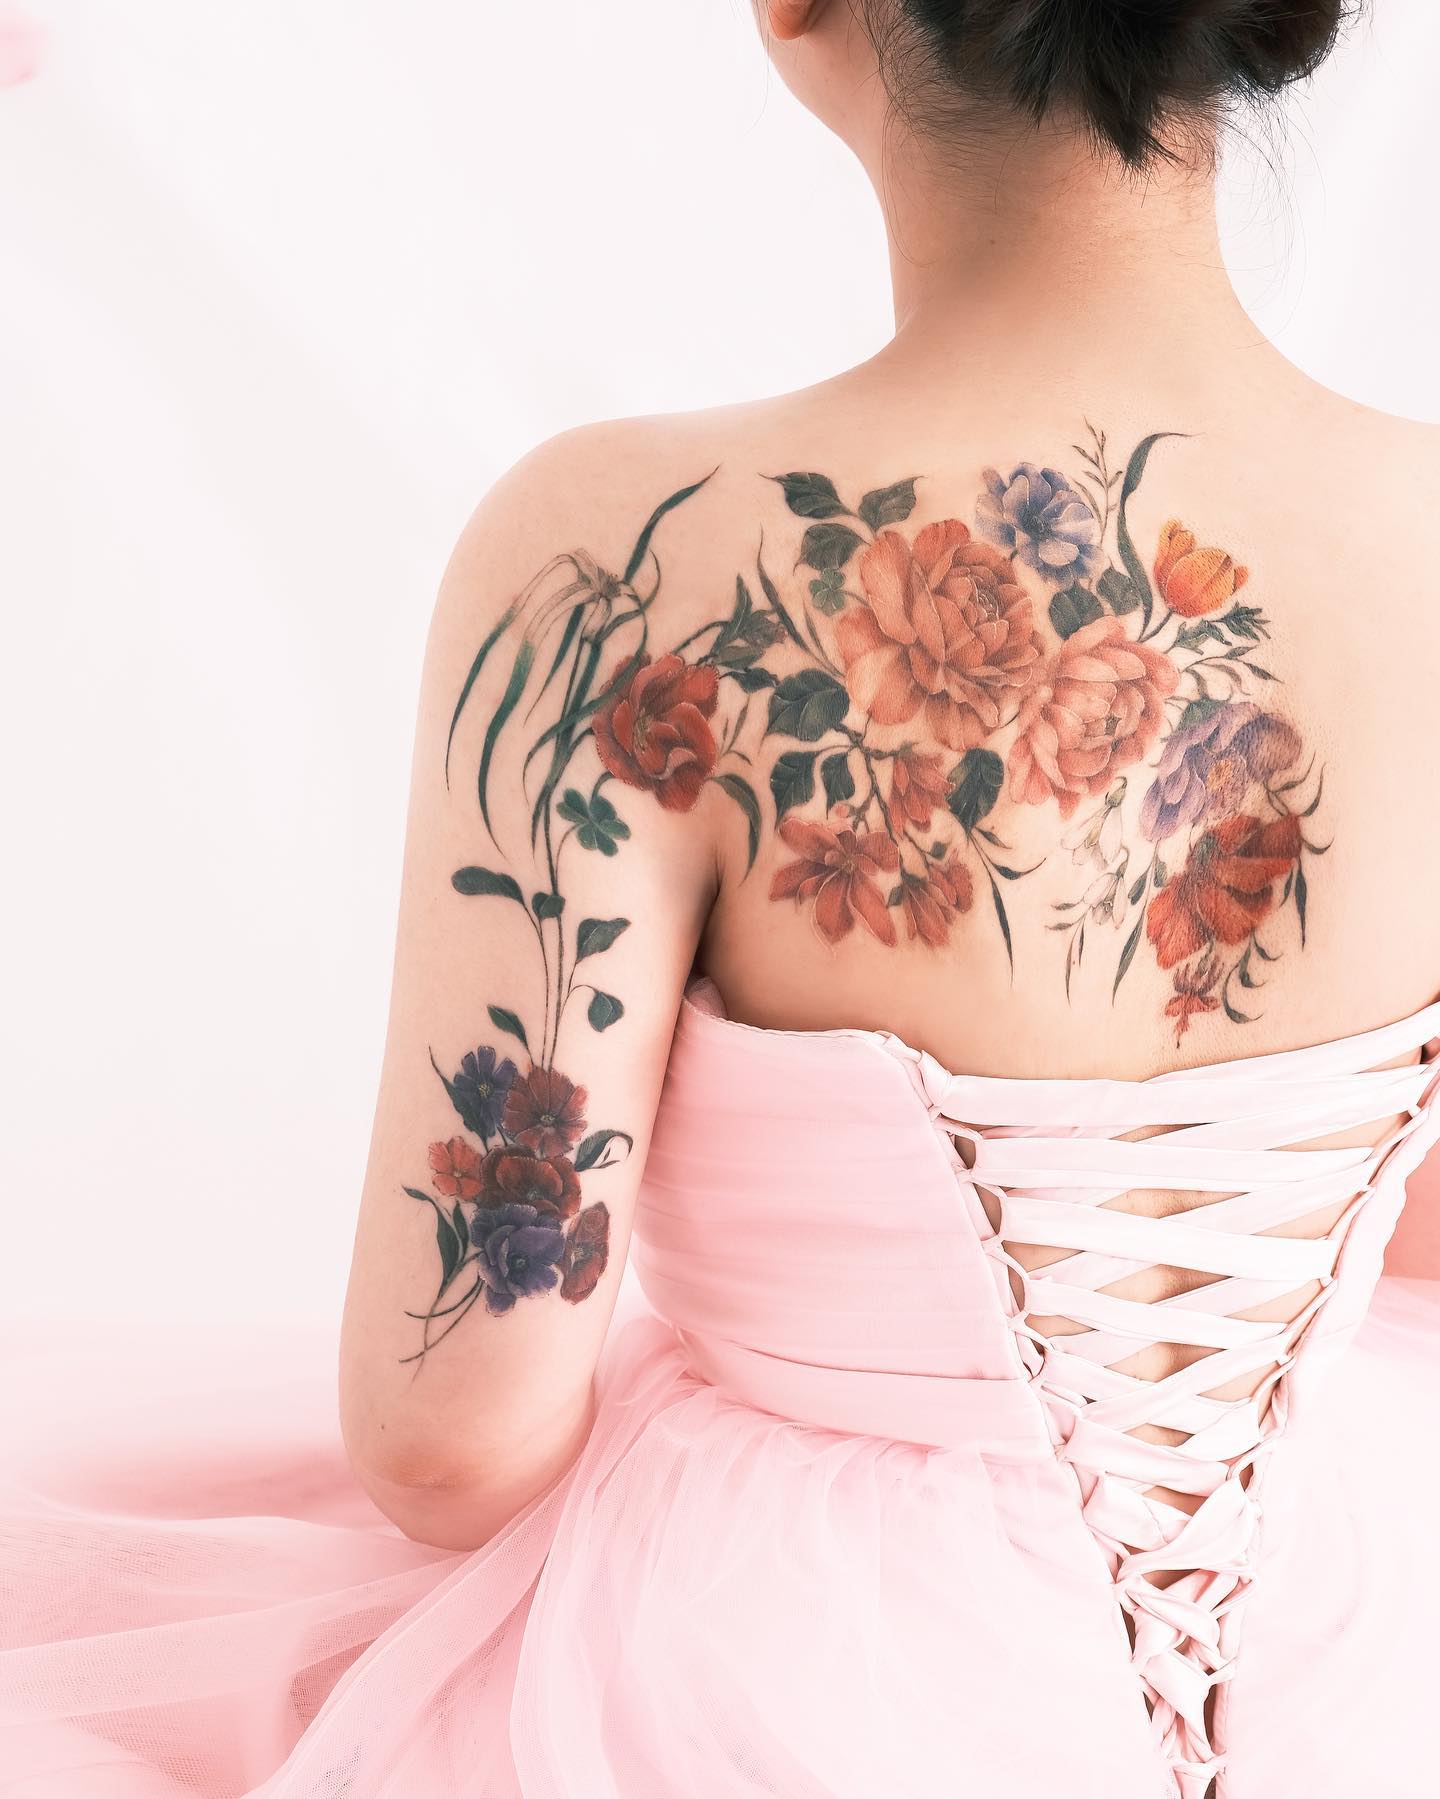 Fun flowers such as these will show that you’re soft, feminine, and romantic. Women who are into fun and bright, as well as artsy designs, will adore this option across their backs.